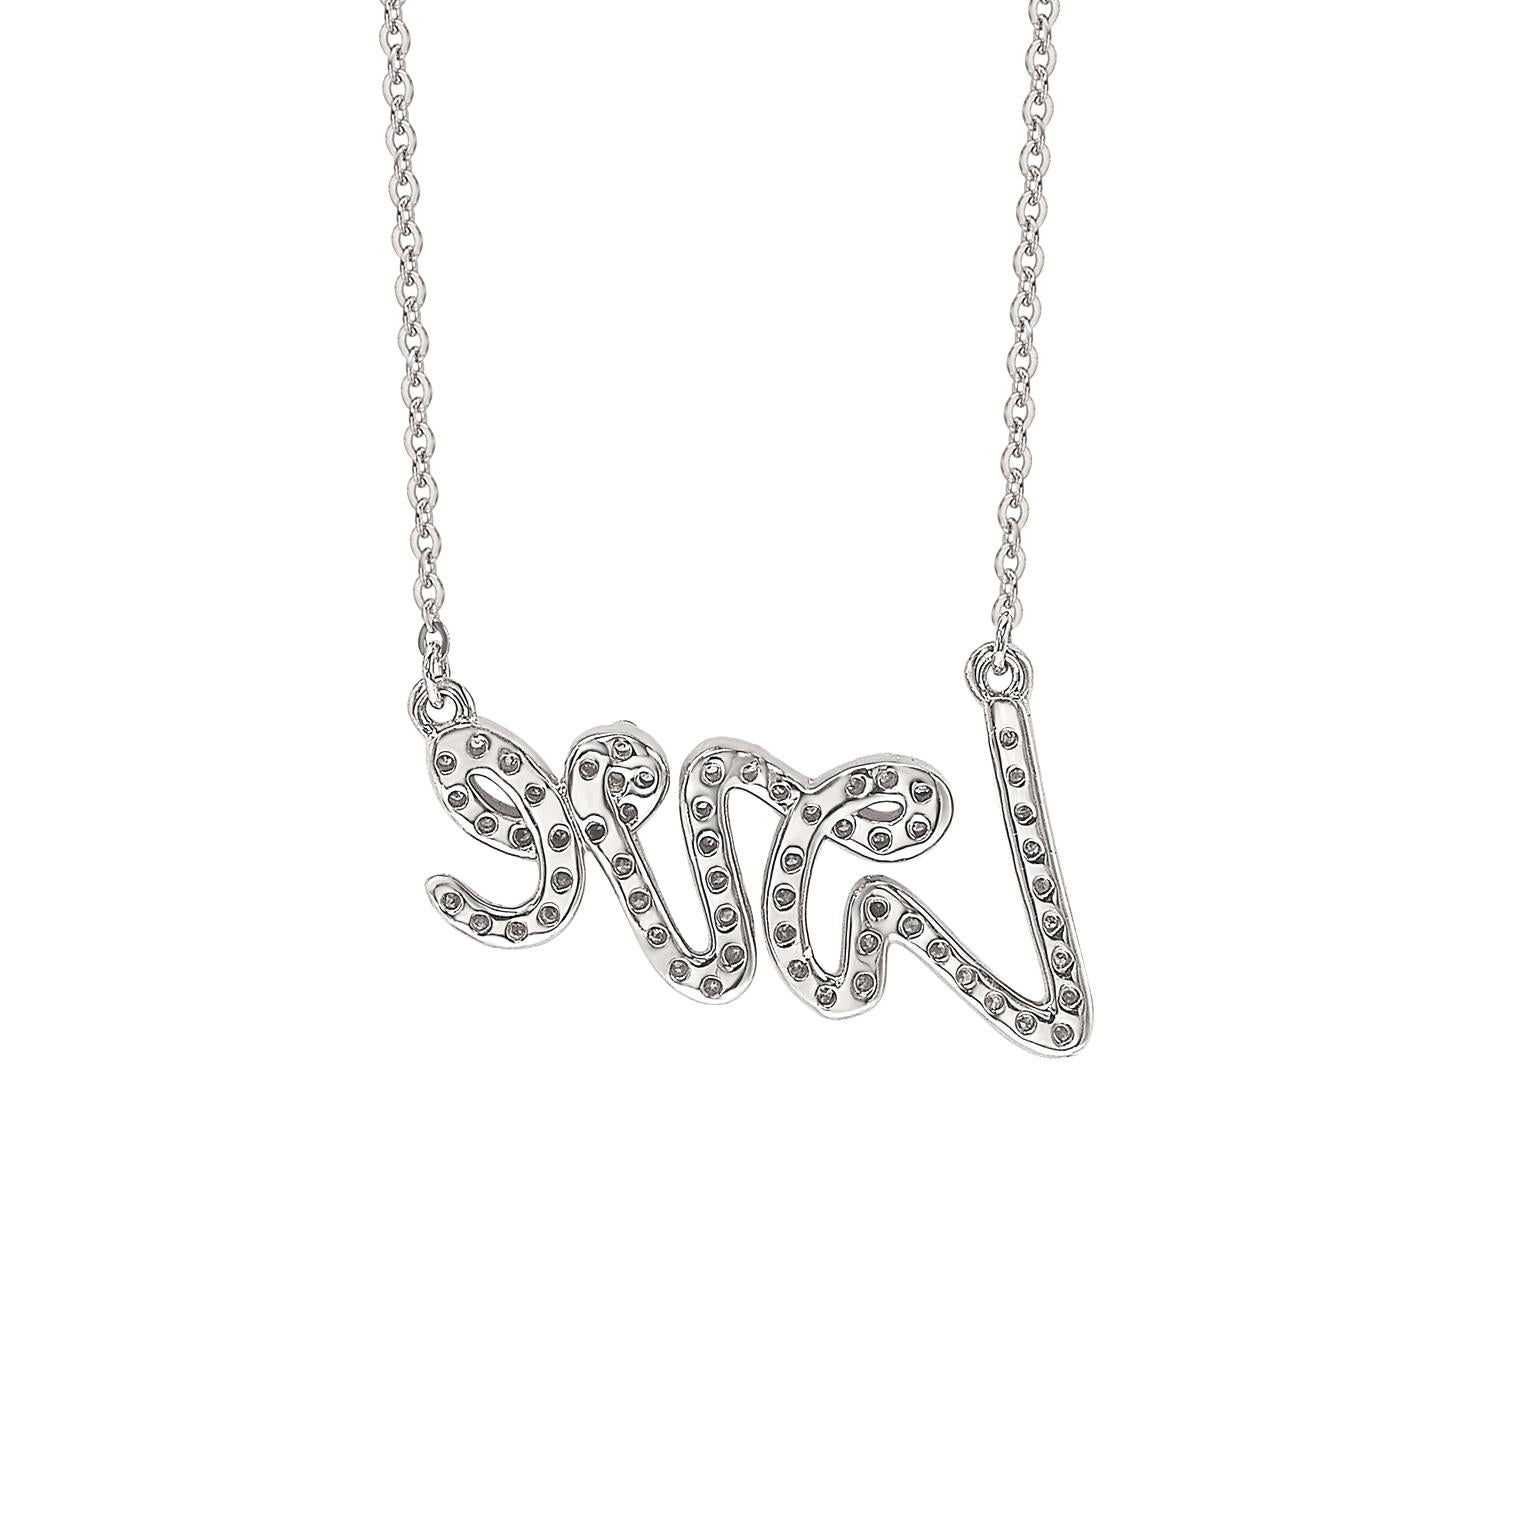 This elegant Suzy Levian Love necklace displays round-cut diamonds on 14 karat white gold setting. This gorgeous Love necklace has 60, 1 mm, white round cut diamonds totaling .30 cttw. This love necklace can be perfect to wear alone or to stack with